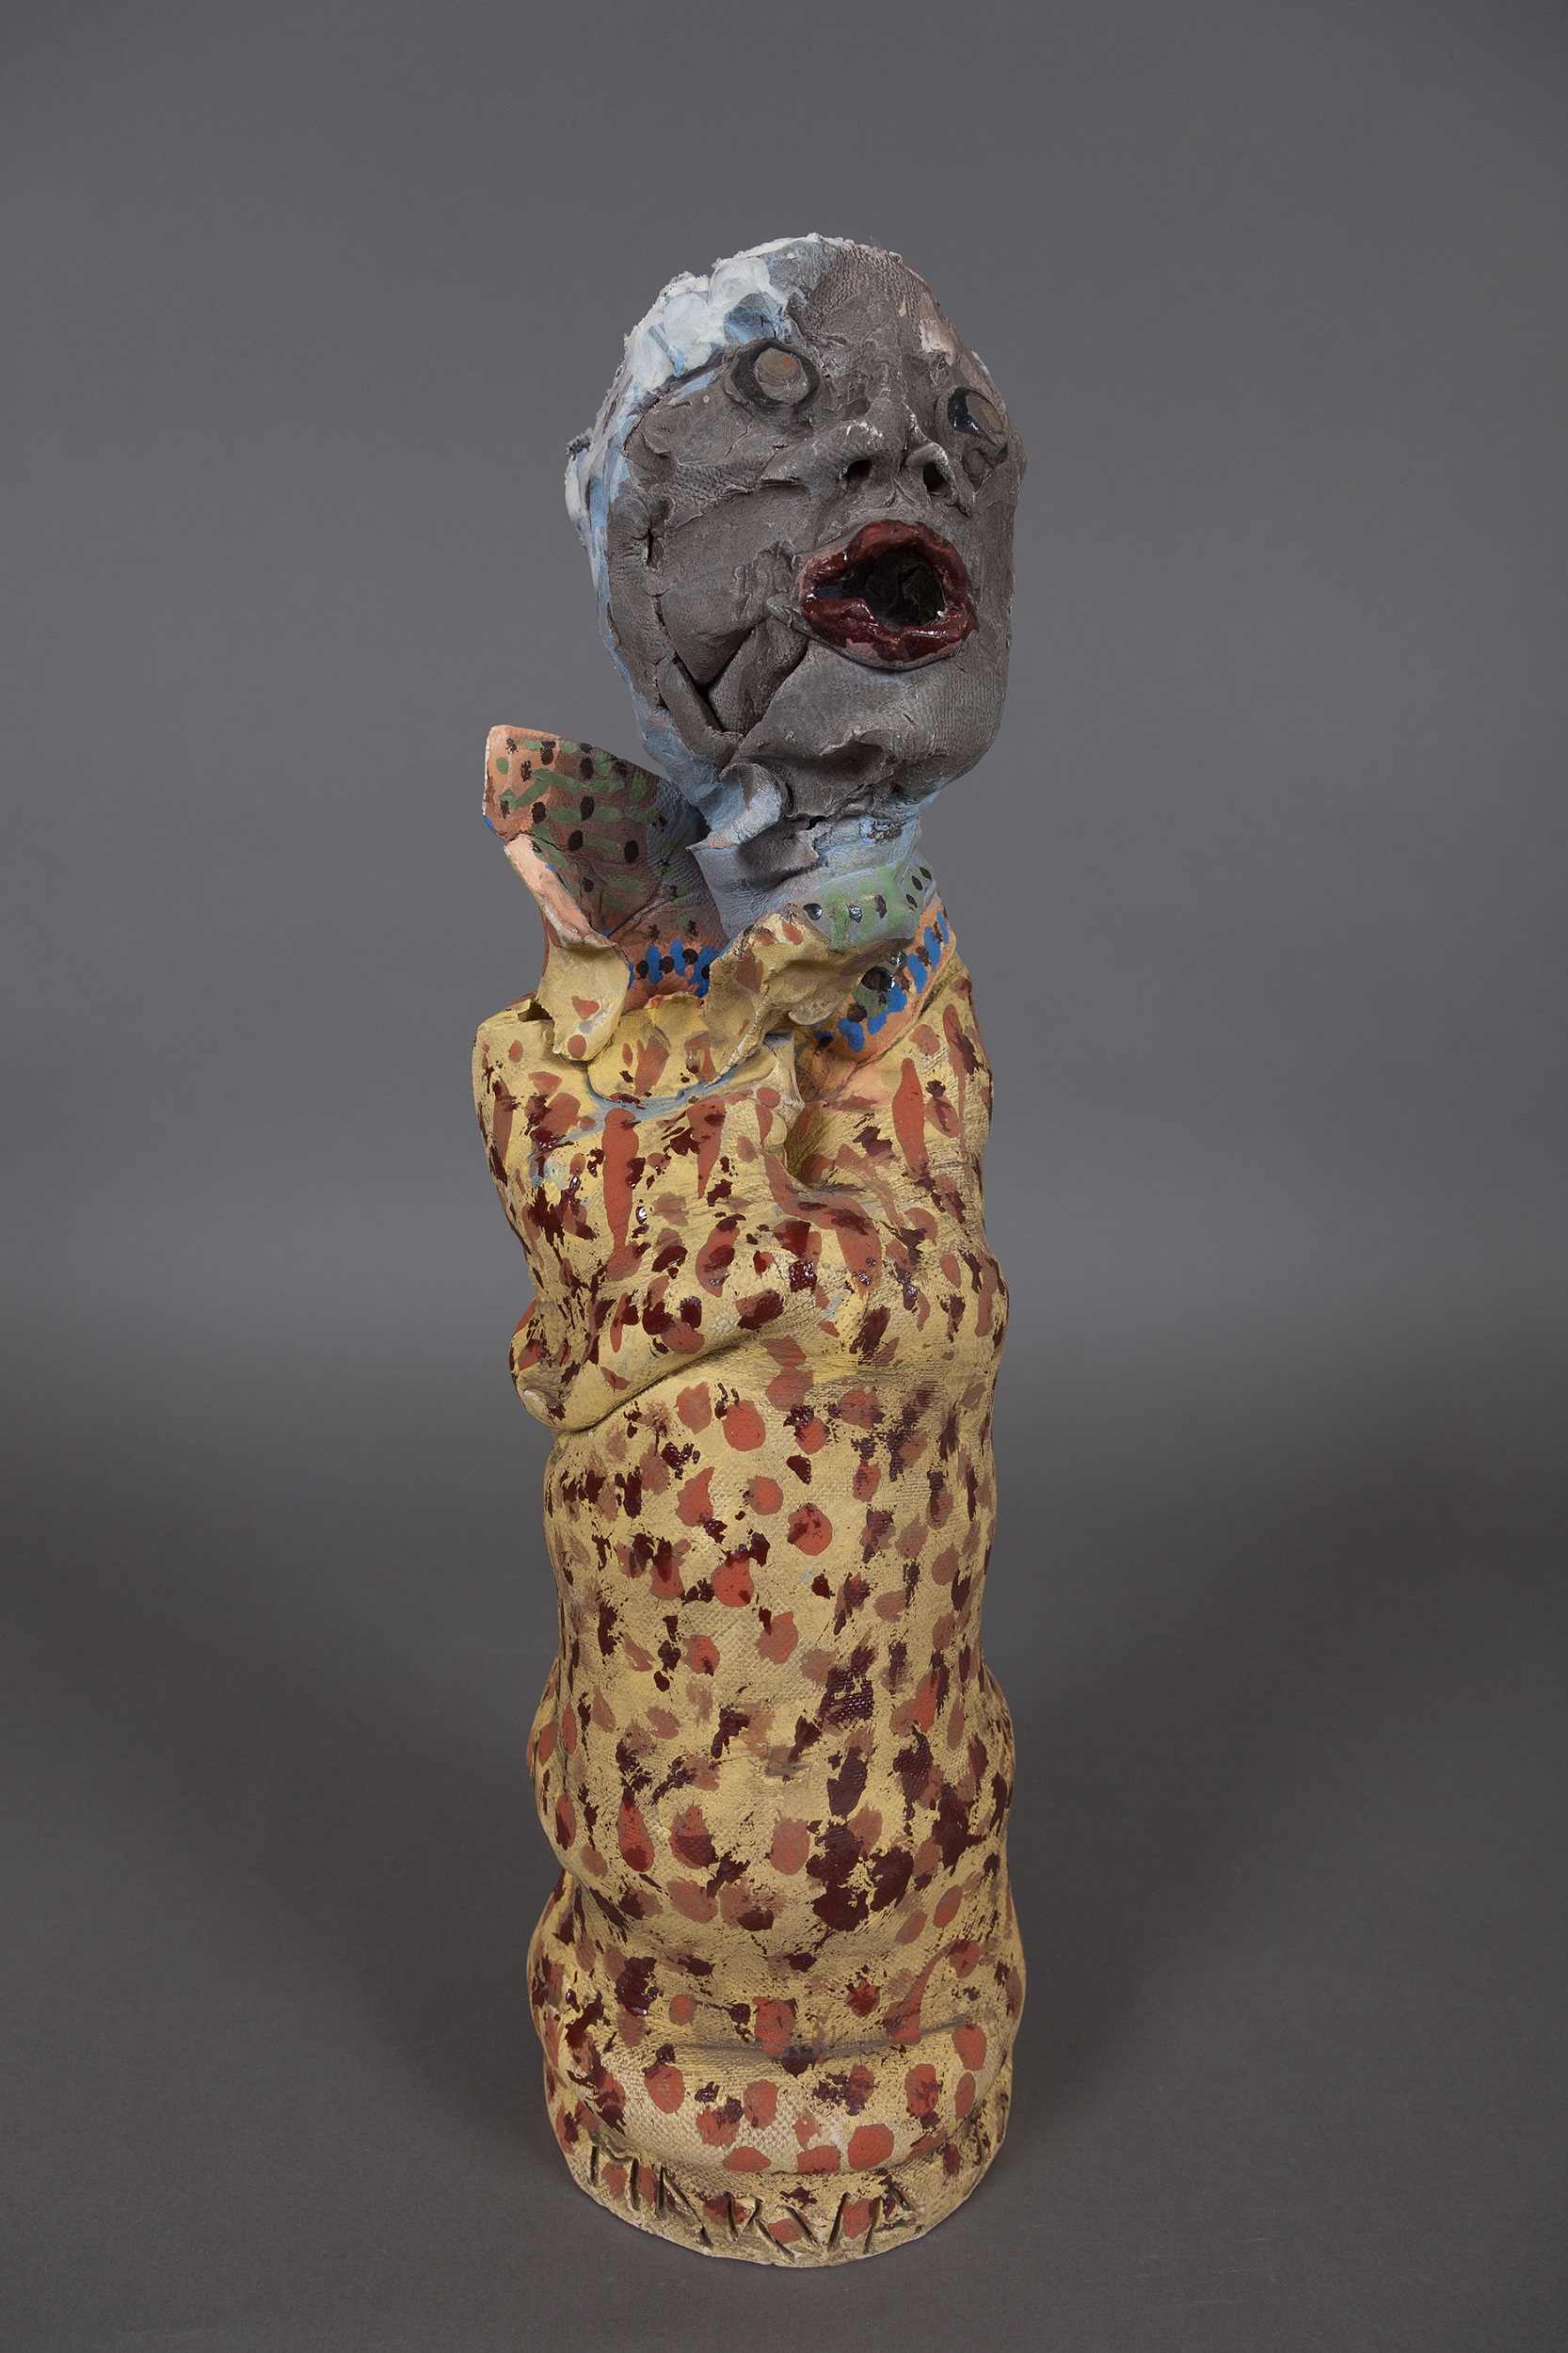 ceramic sculpture with a speckled base and a face-shaped finial